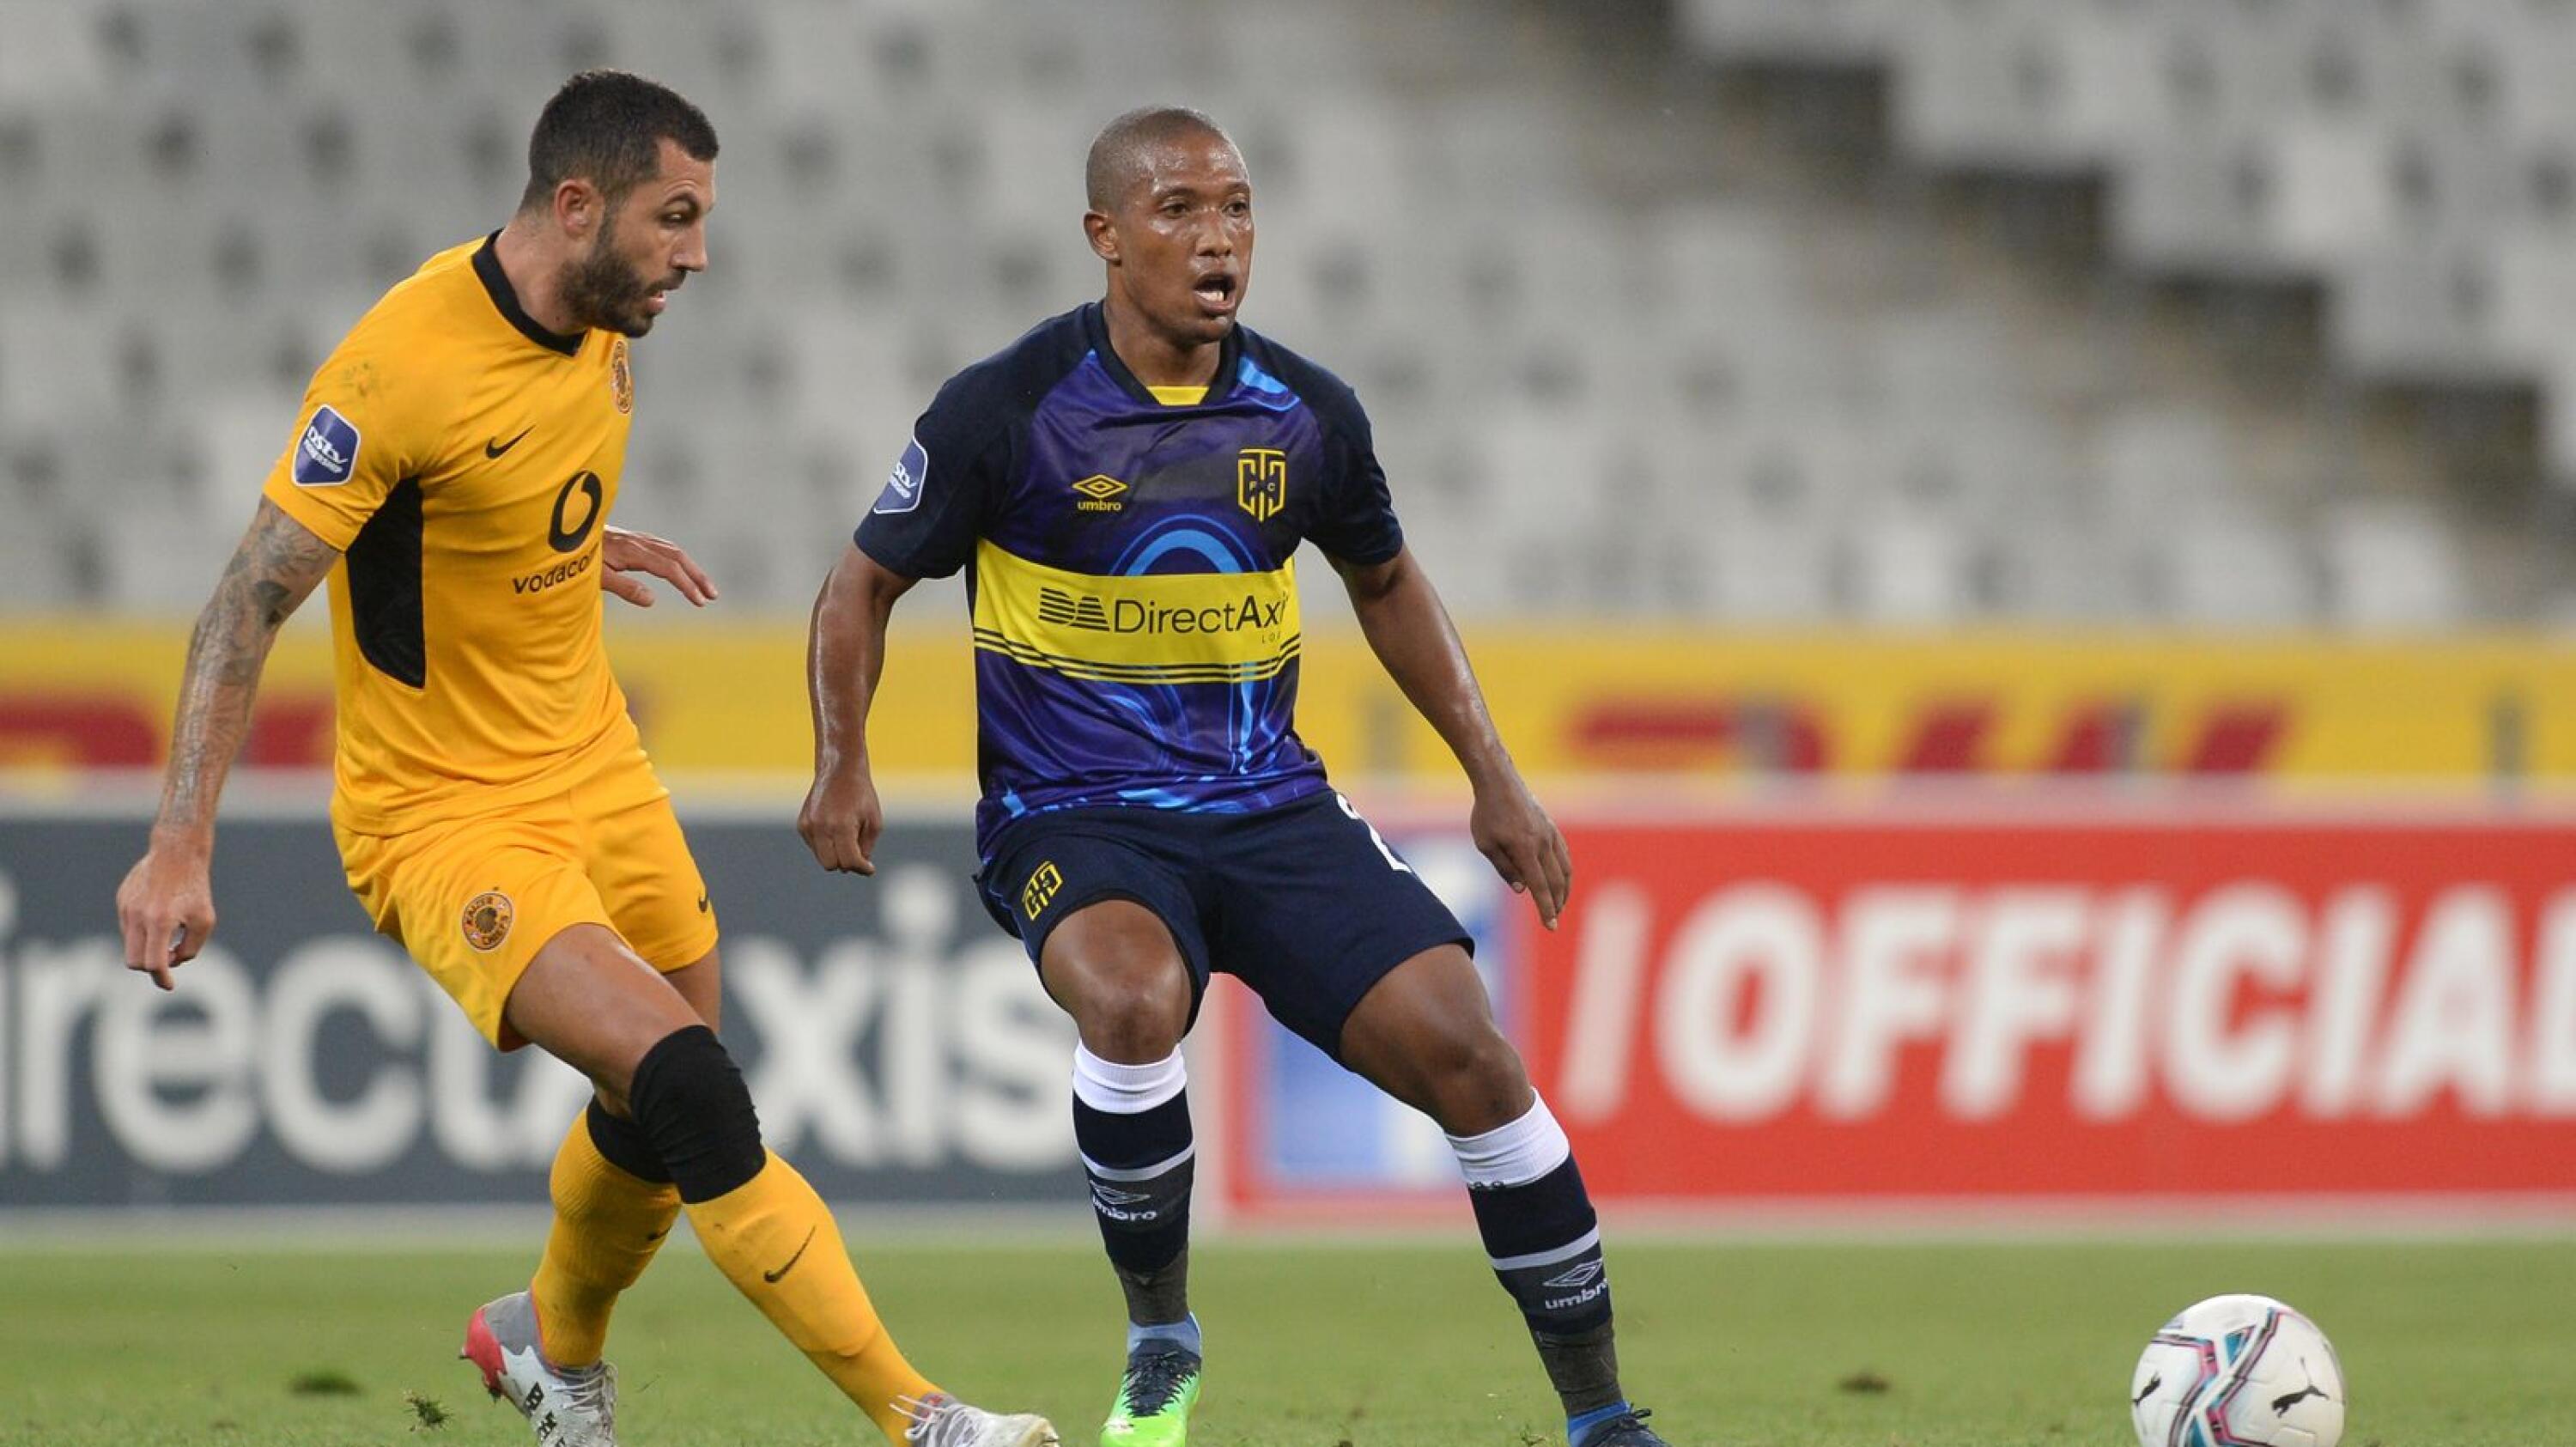 Mogamat May of Cape Town City is challenged by Daniel Cardoso of Kaizer Chiefs during their DStv Premiership game at Cape Town Stadium on Tuesday